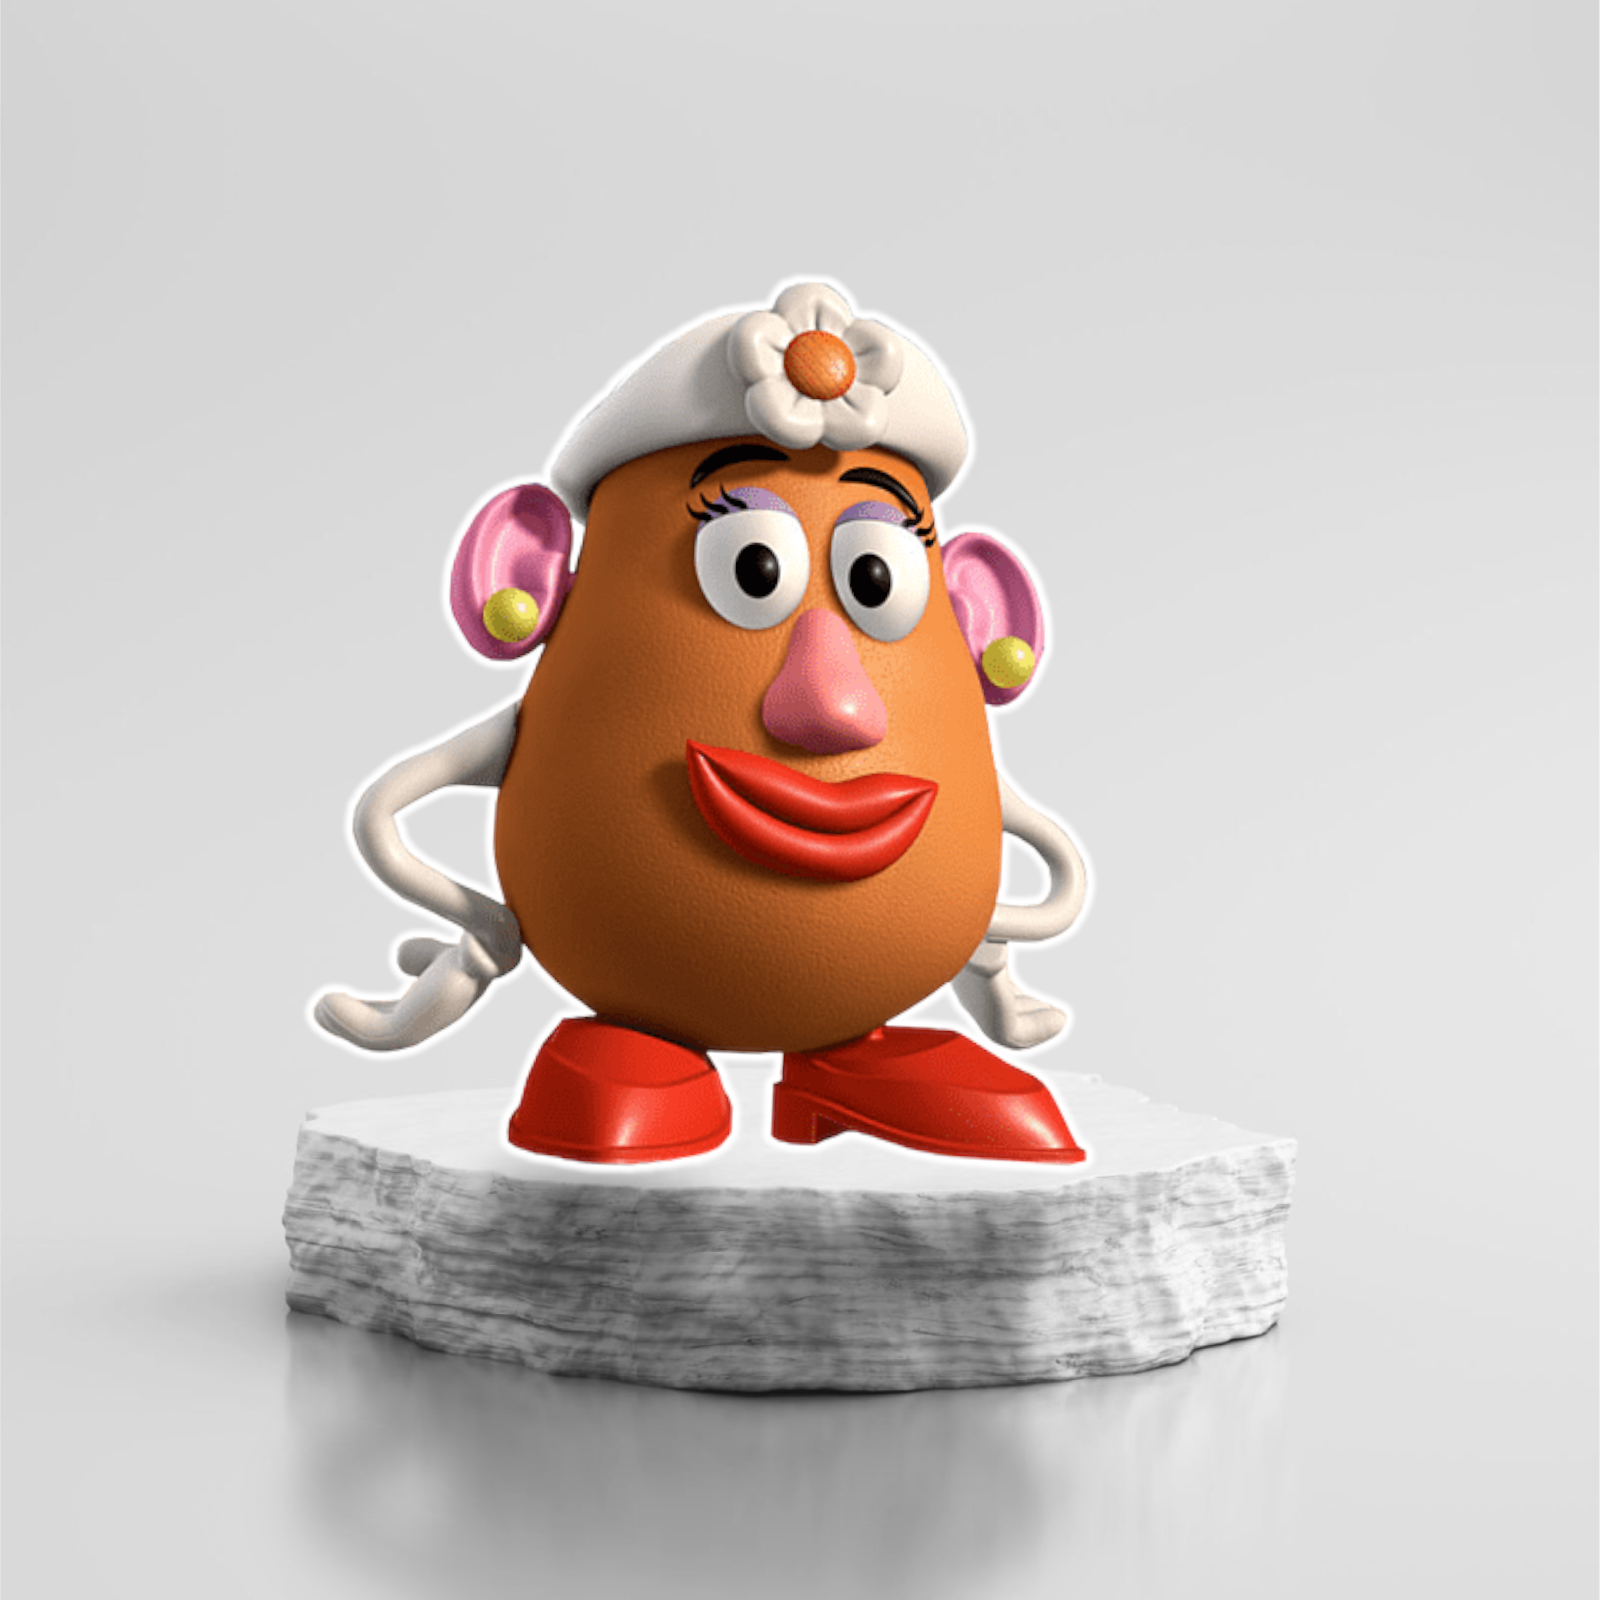 Toy Story: Mr. Potato Head Mini Cardstock Cutout - Disney Stand Out 10W x 14H